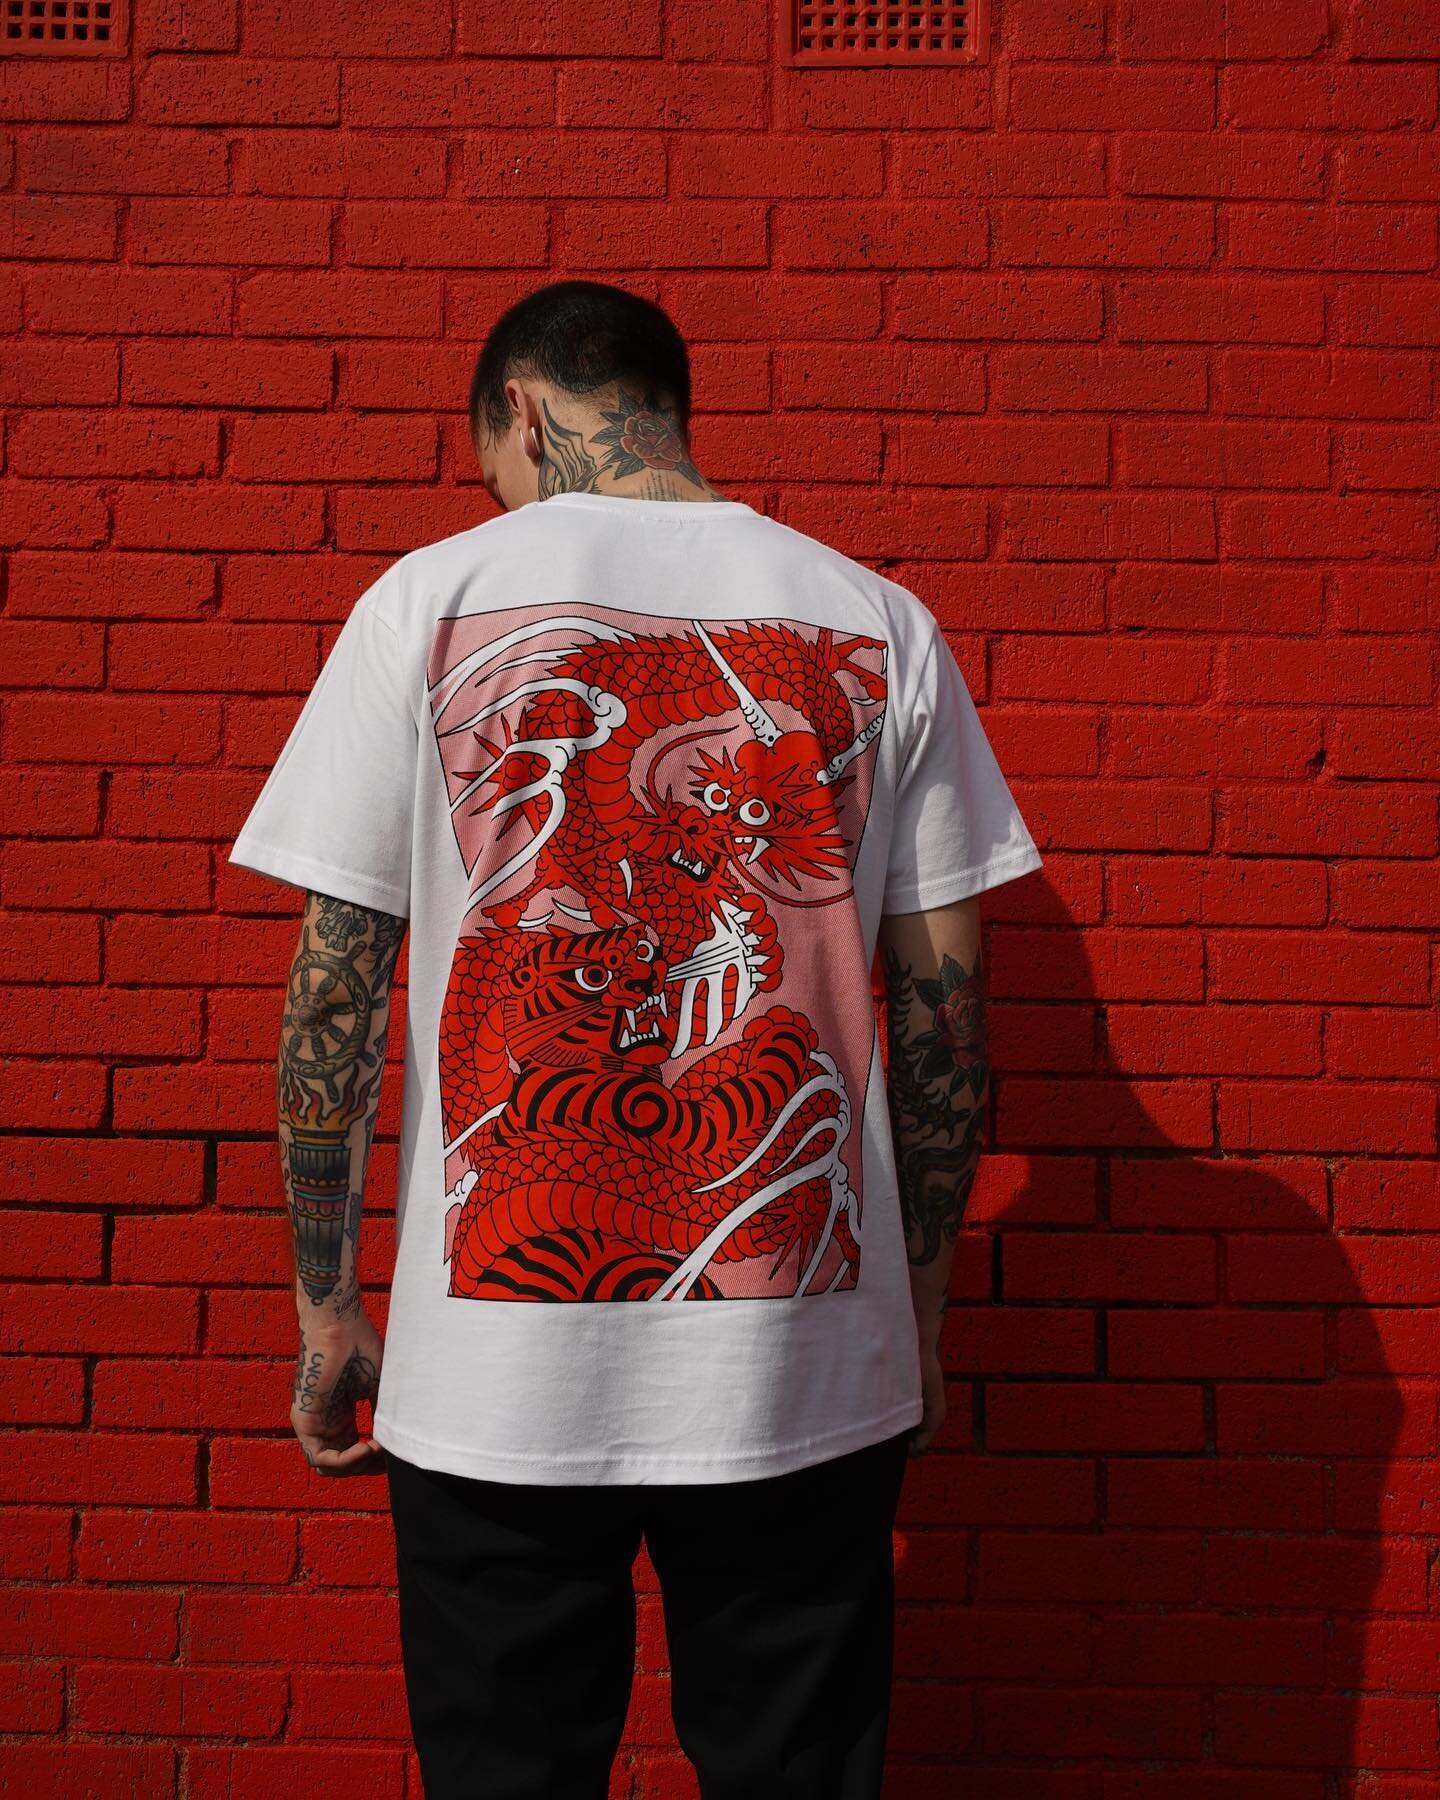 RED POINT TATTOO LIMITED SERIES - OUT NOW!
This is the first release of our RPT limited edition series. 
Artwork by @gabriele_cardosi 
Only 40 available.
 
We will be release a different design every month. 

www.redpointtattoo.com

#rpt #redpointtat